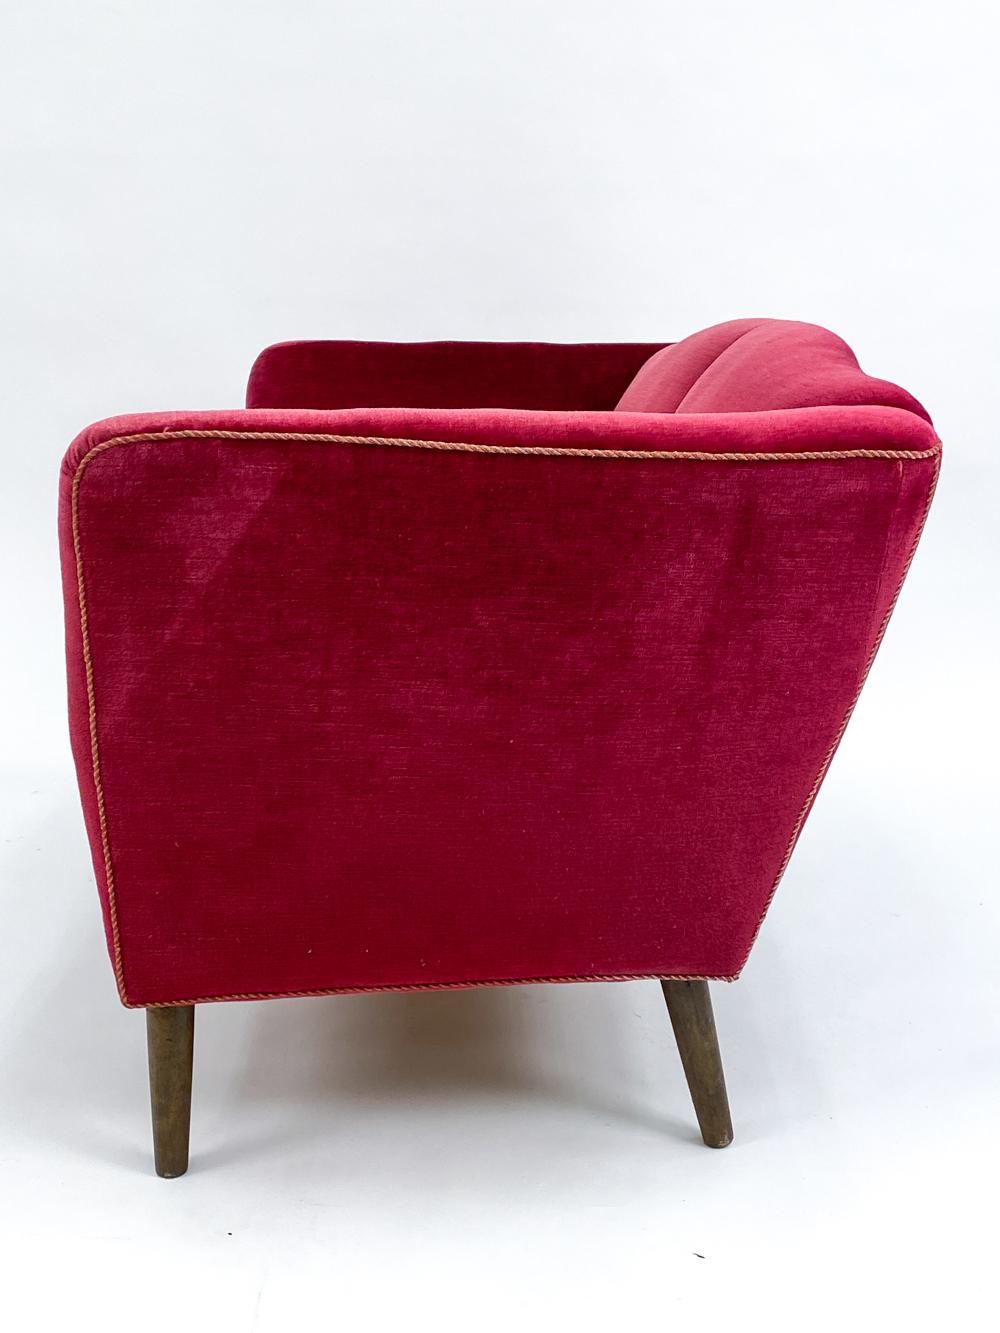 Swedish Mid-Century Beech & Red Mohair Sofa, c. 1950's For Sale 2